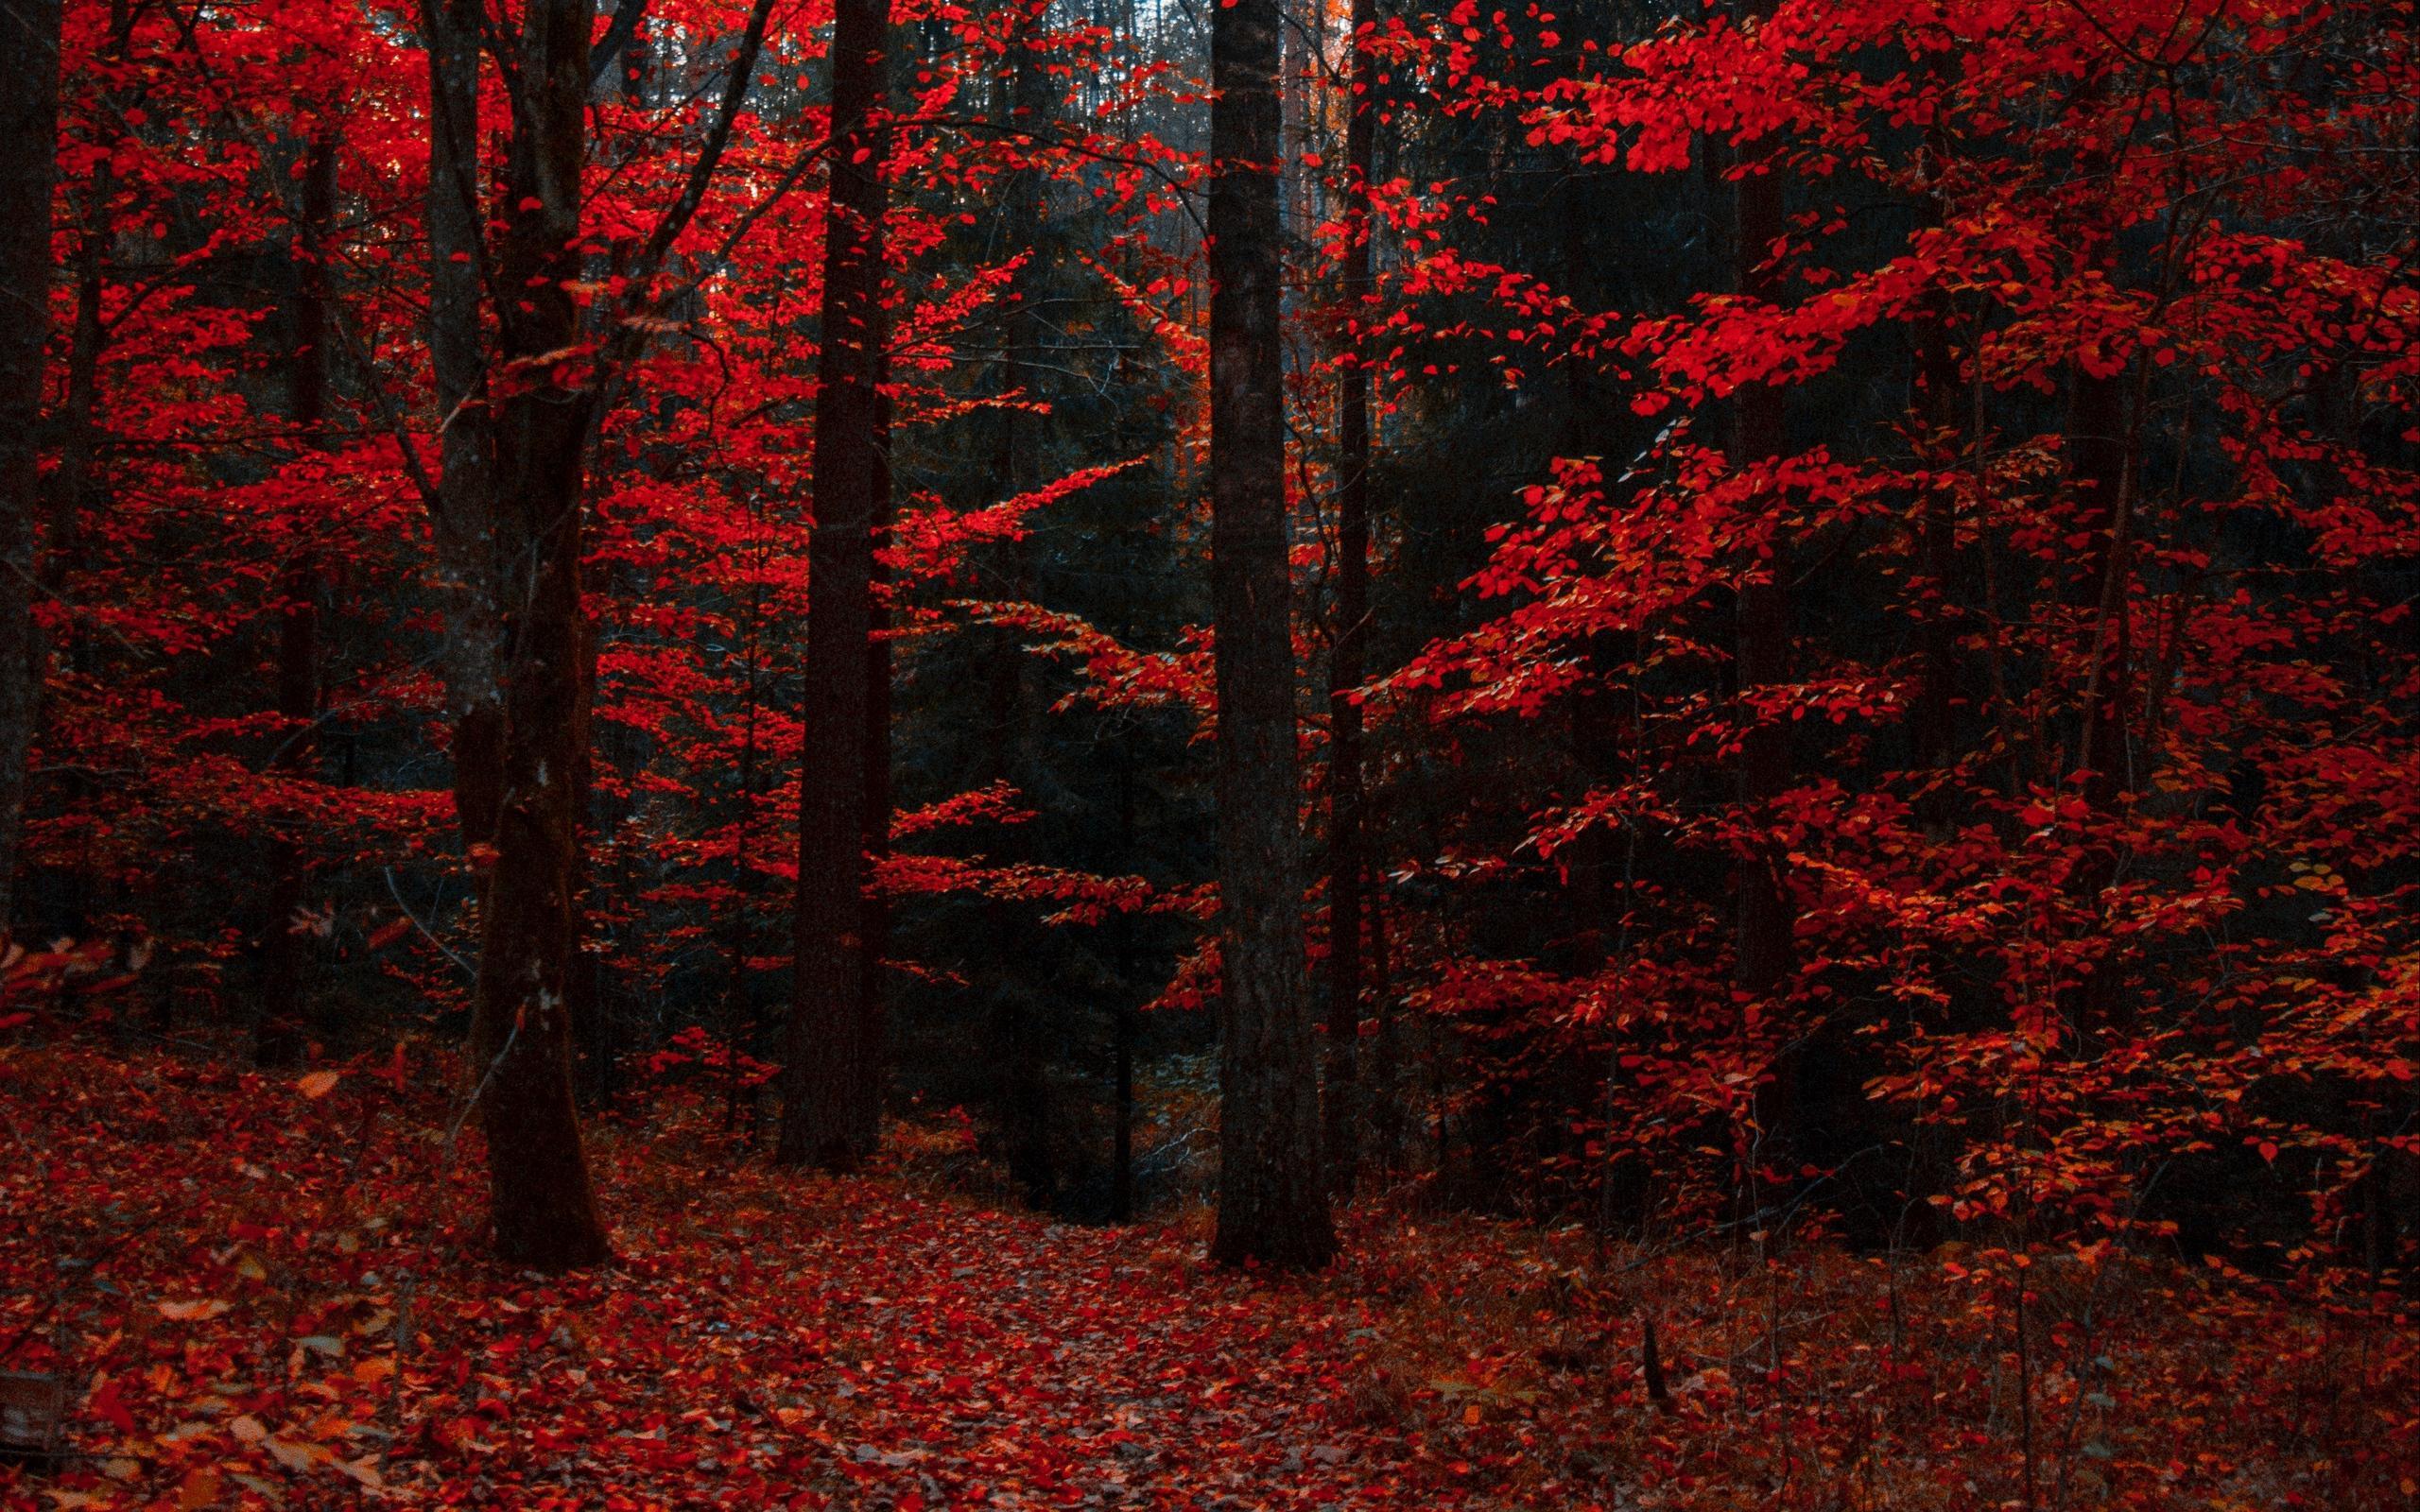 Download wallpaper 2560x1600 autumn, forest, trees, foliage